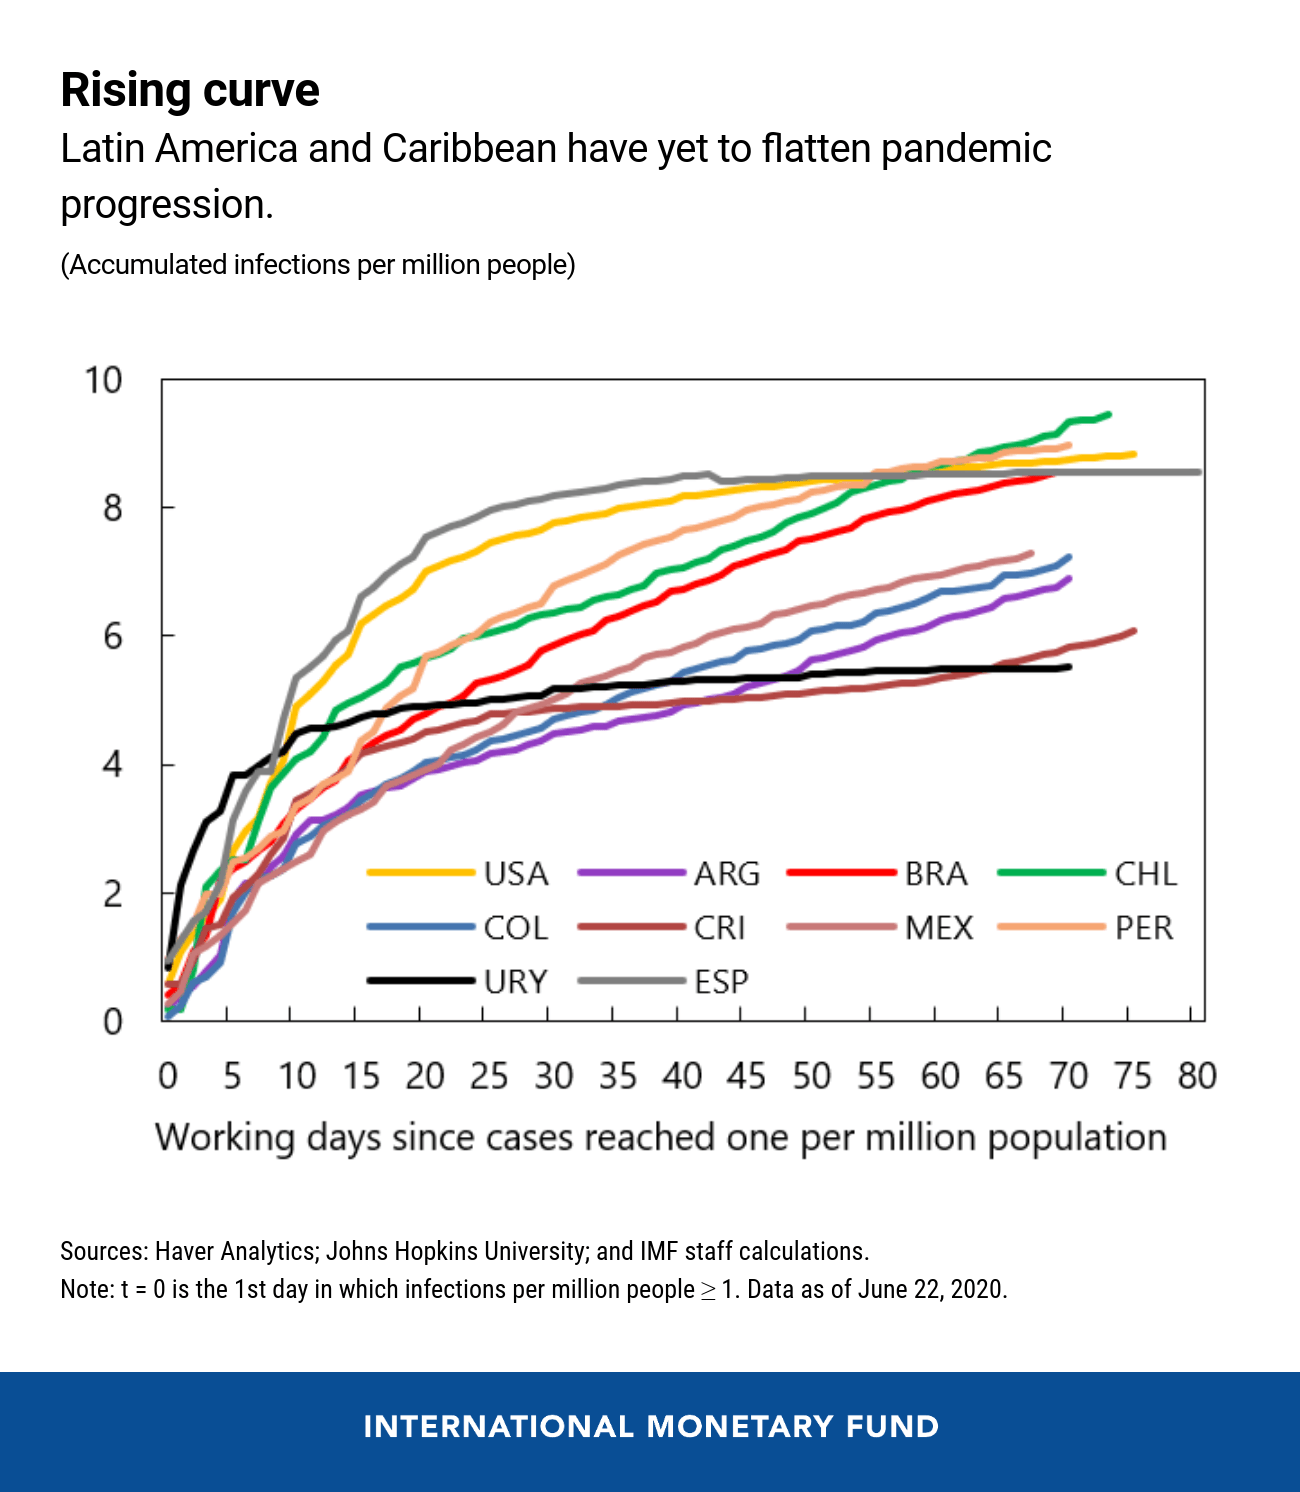 Outlook For Latin America And The Caribbean: An Intensifying Pandemic